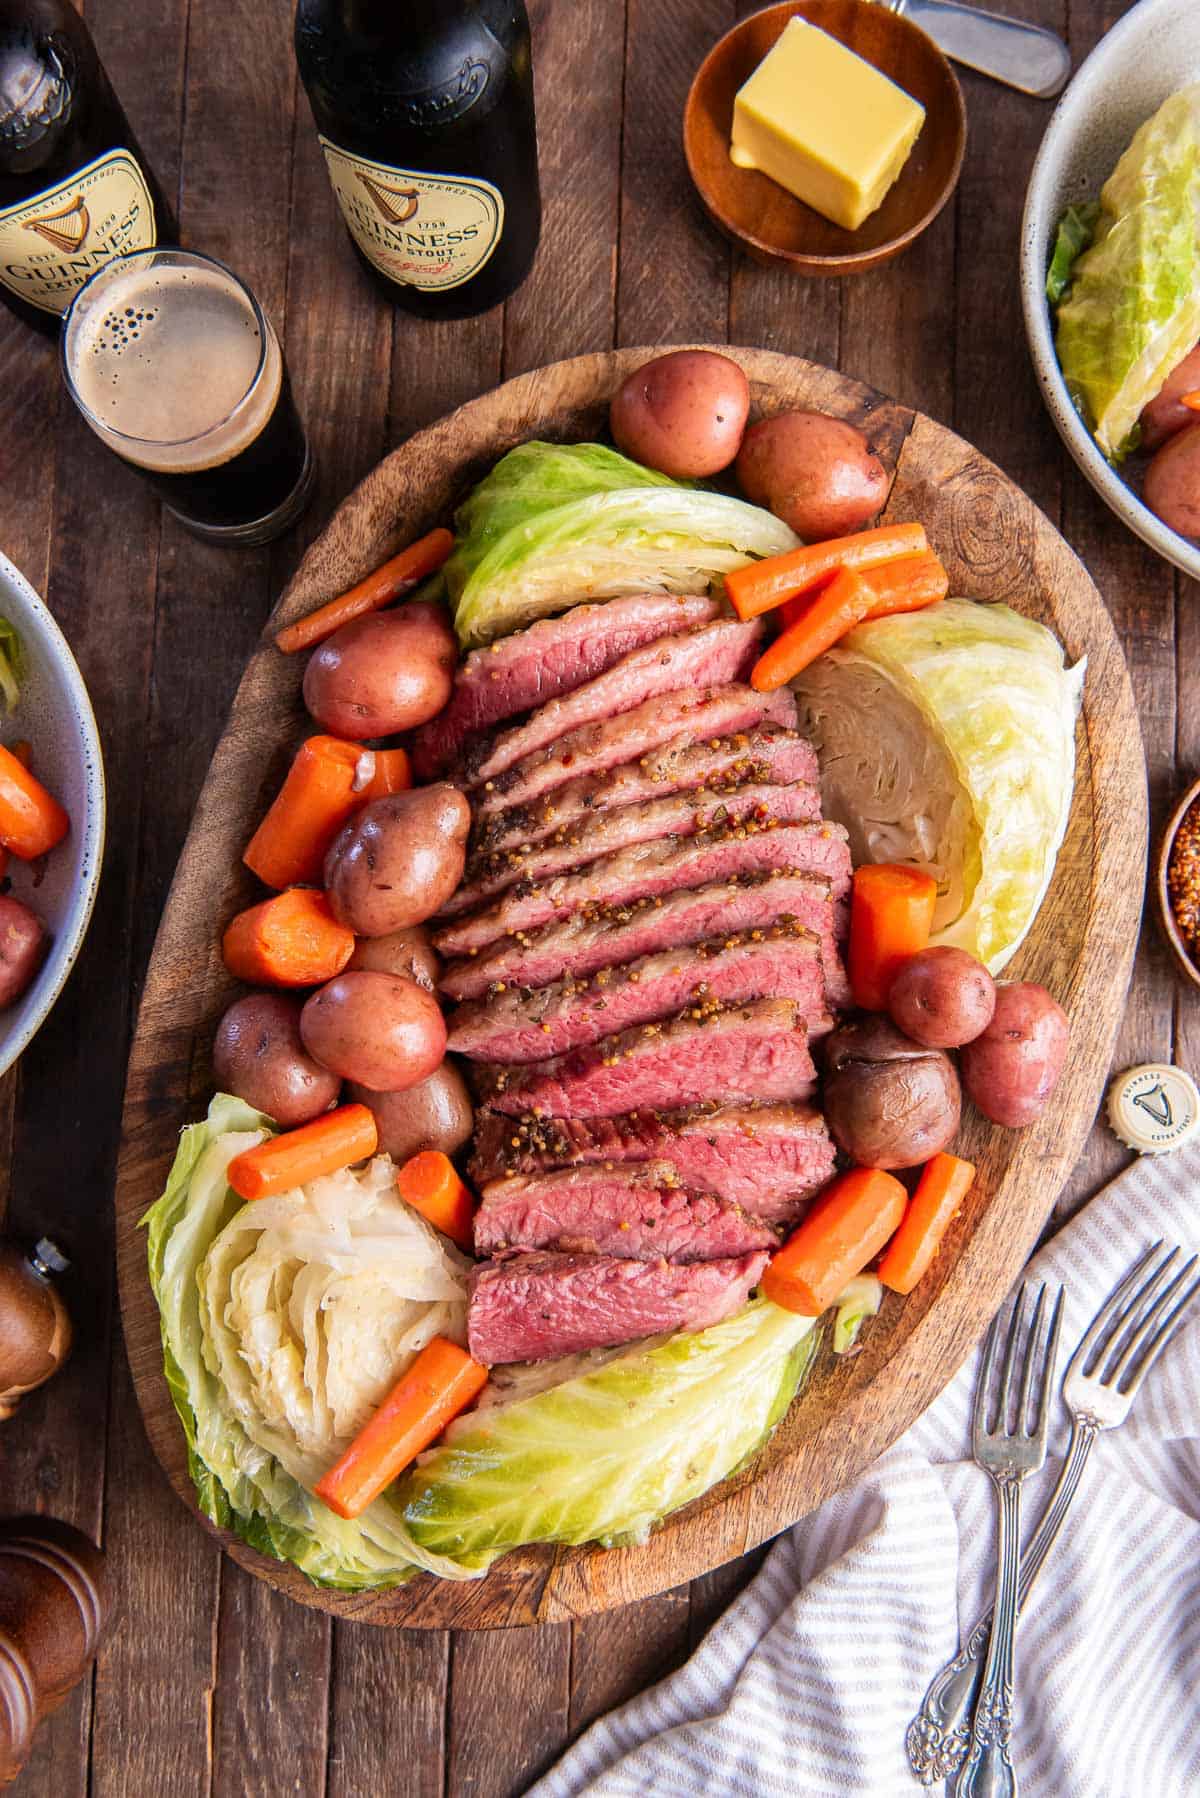 Sliced corned beef, cabbage, carrots, and potatoes on a wood platter.